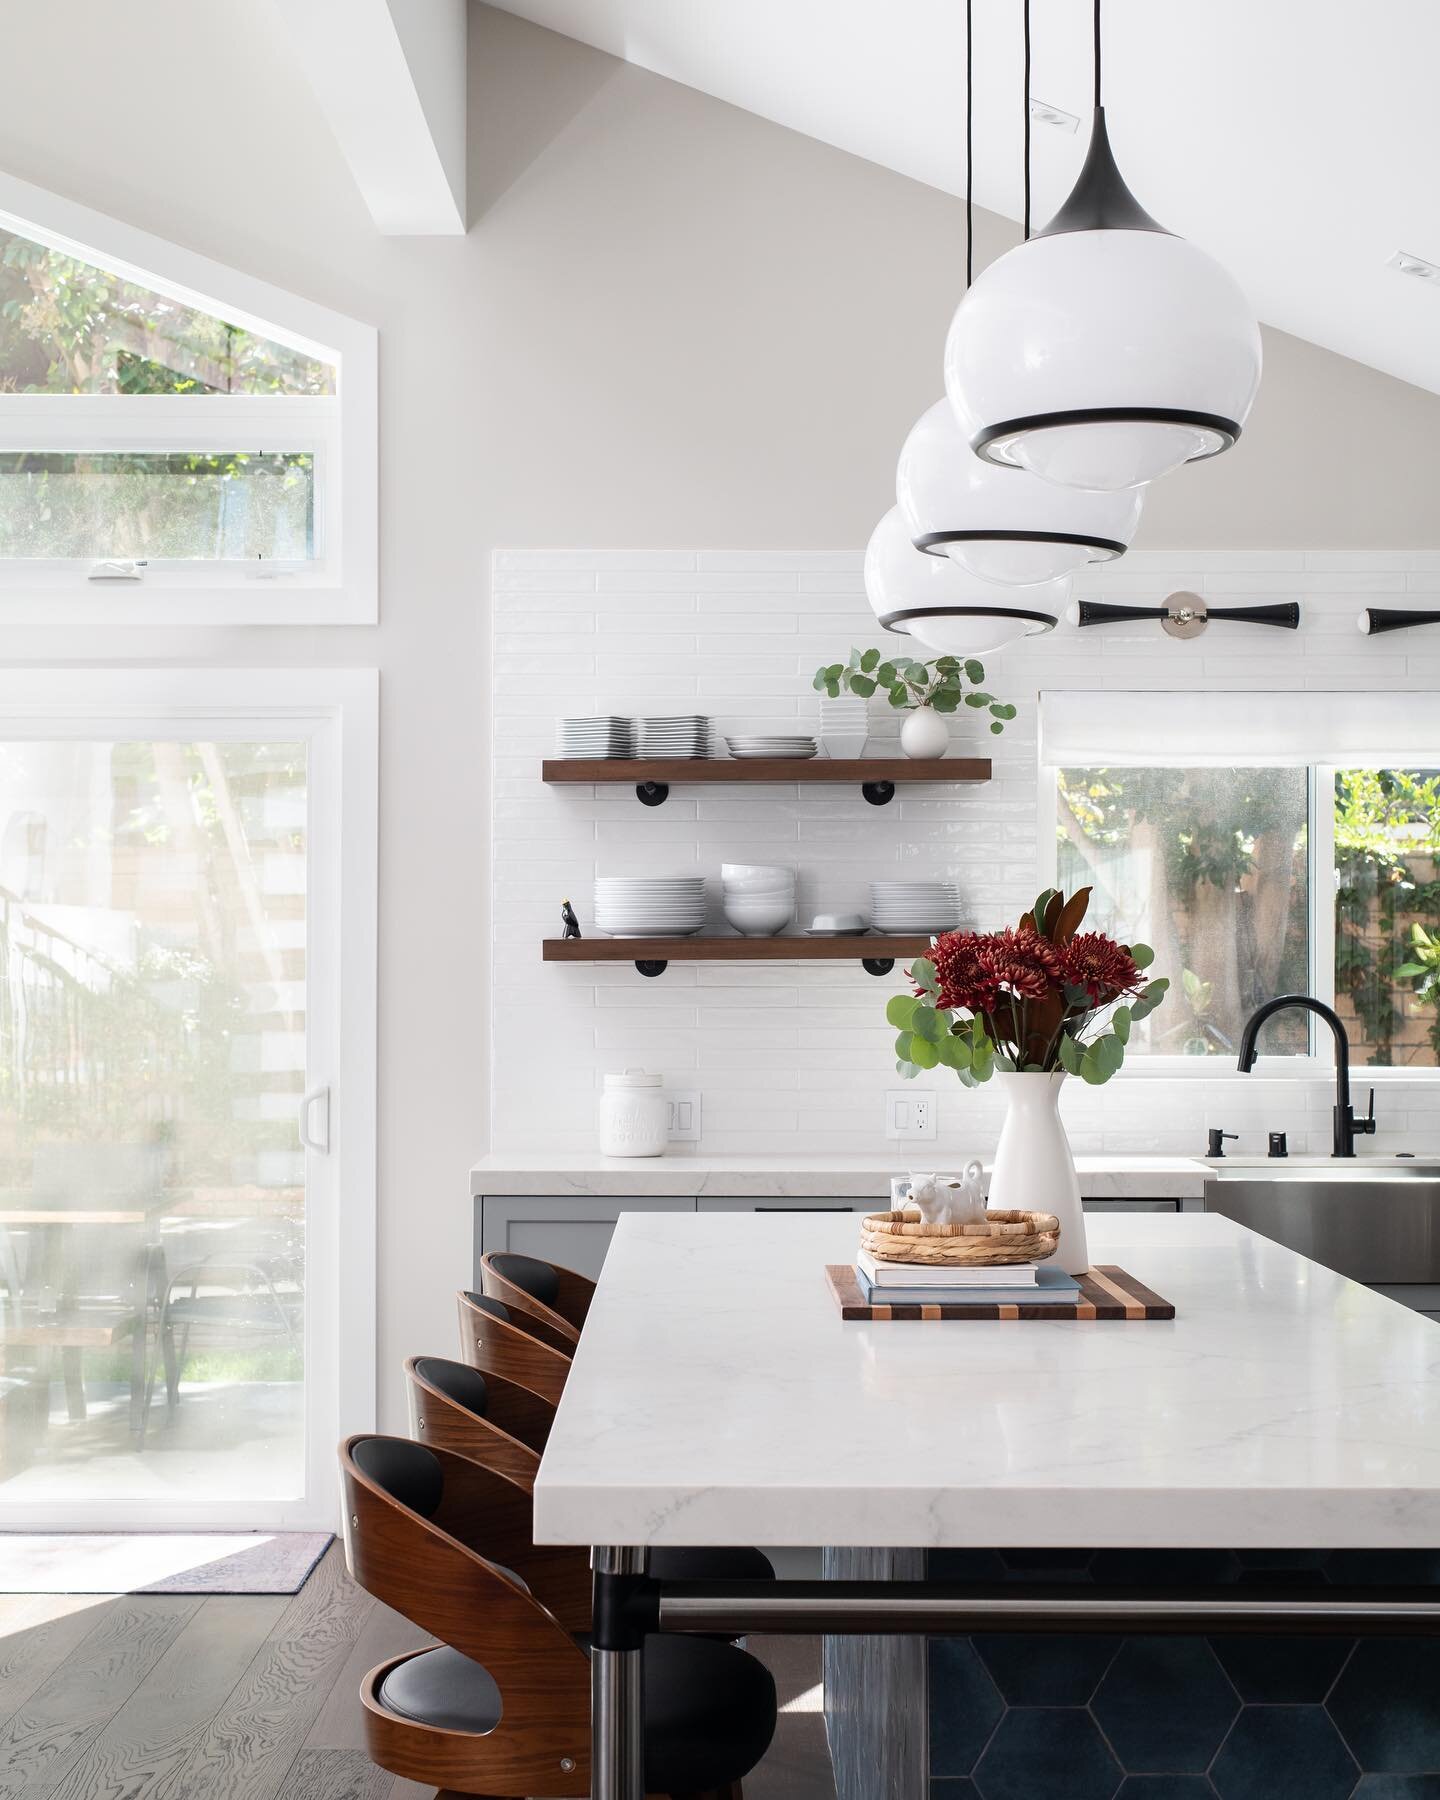 I love all the clean lines, colors and textures in this kitchen.  It&rsquo;s perfect for Mother&rsquo;s Day brunch.